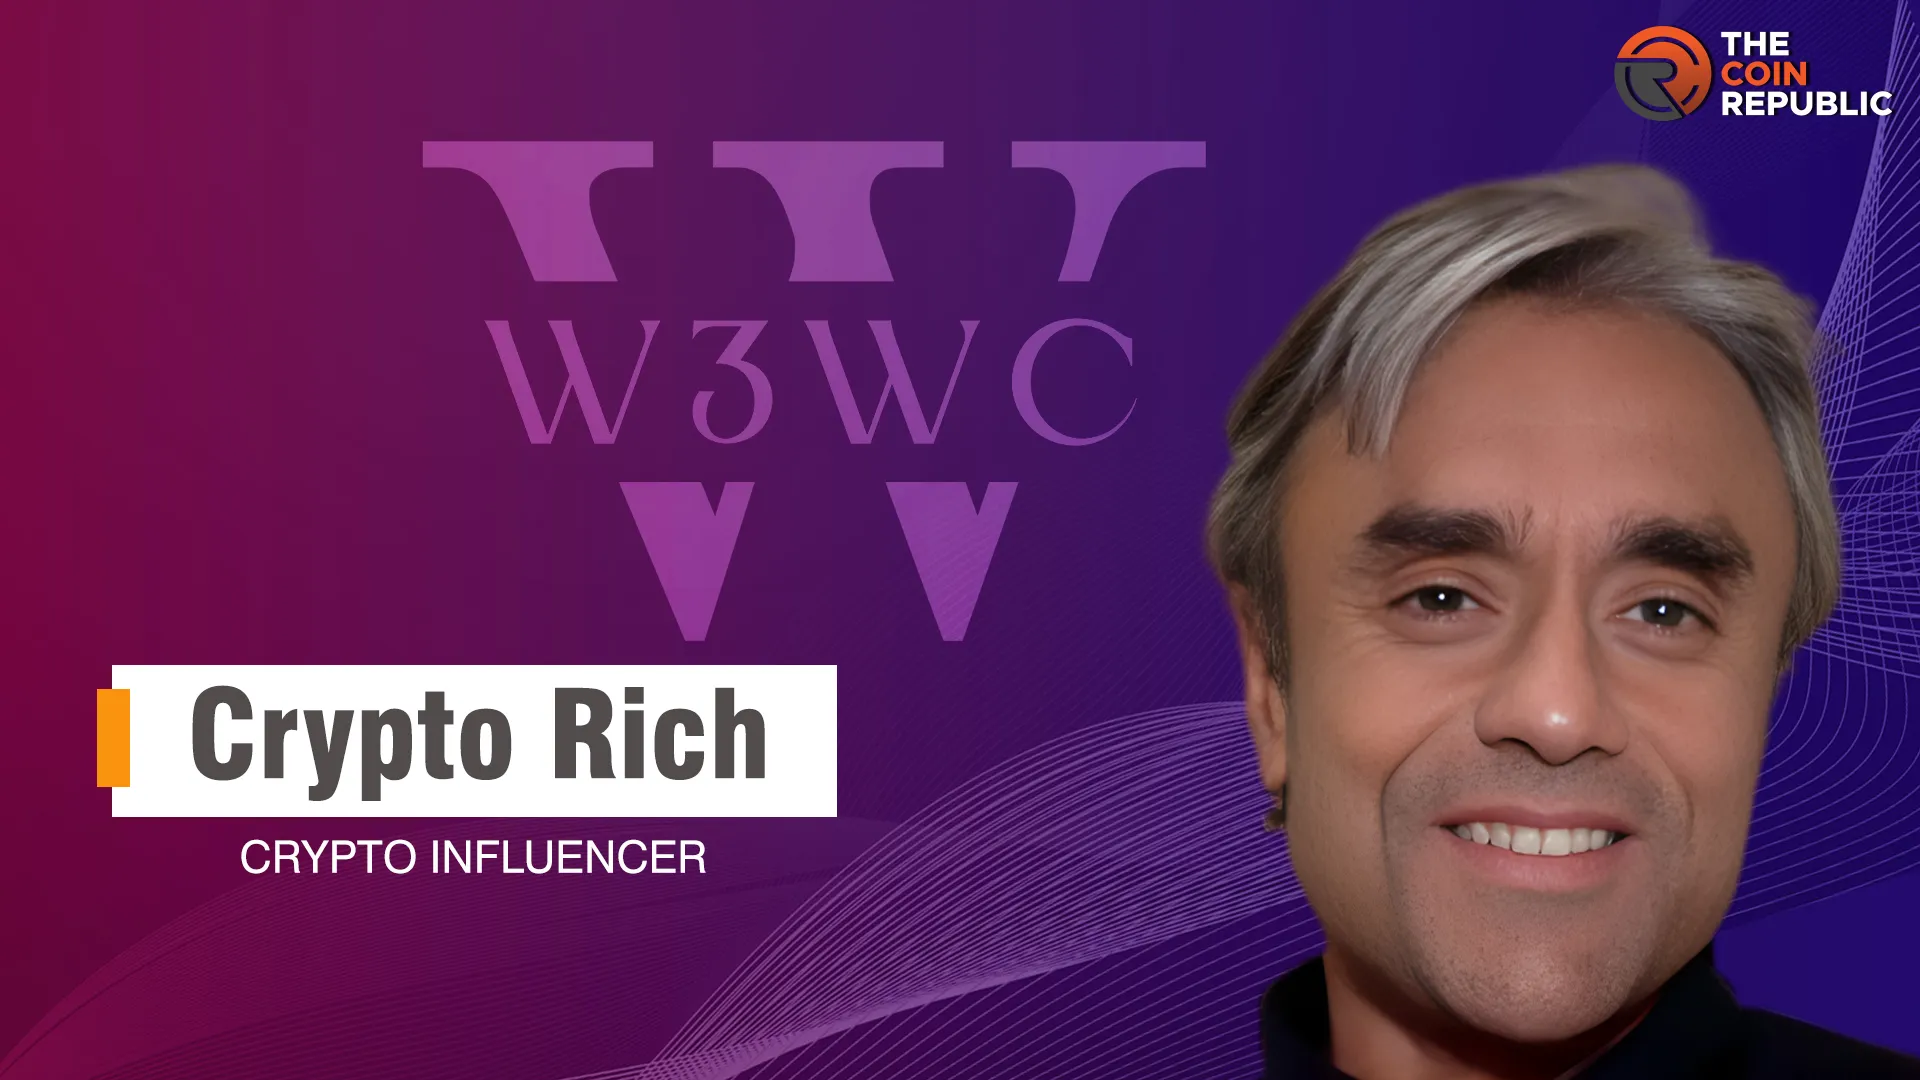 CryptoRich & His Crypto Influencer Journey